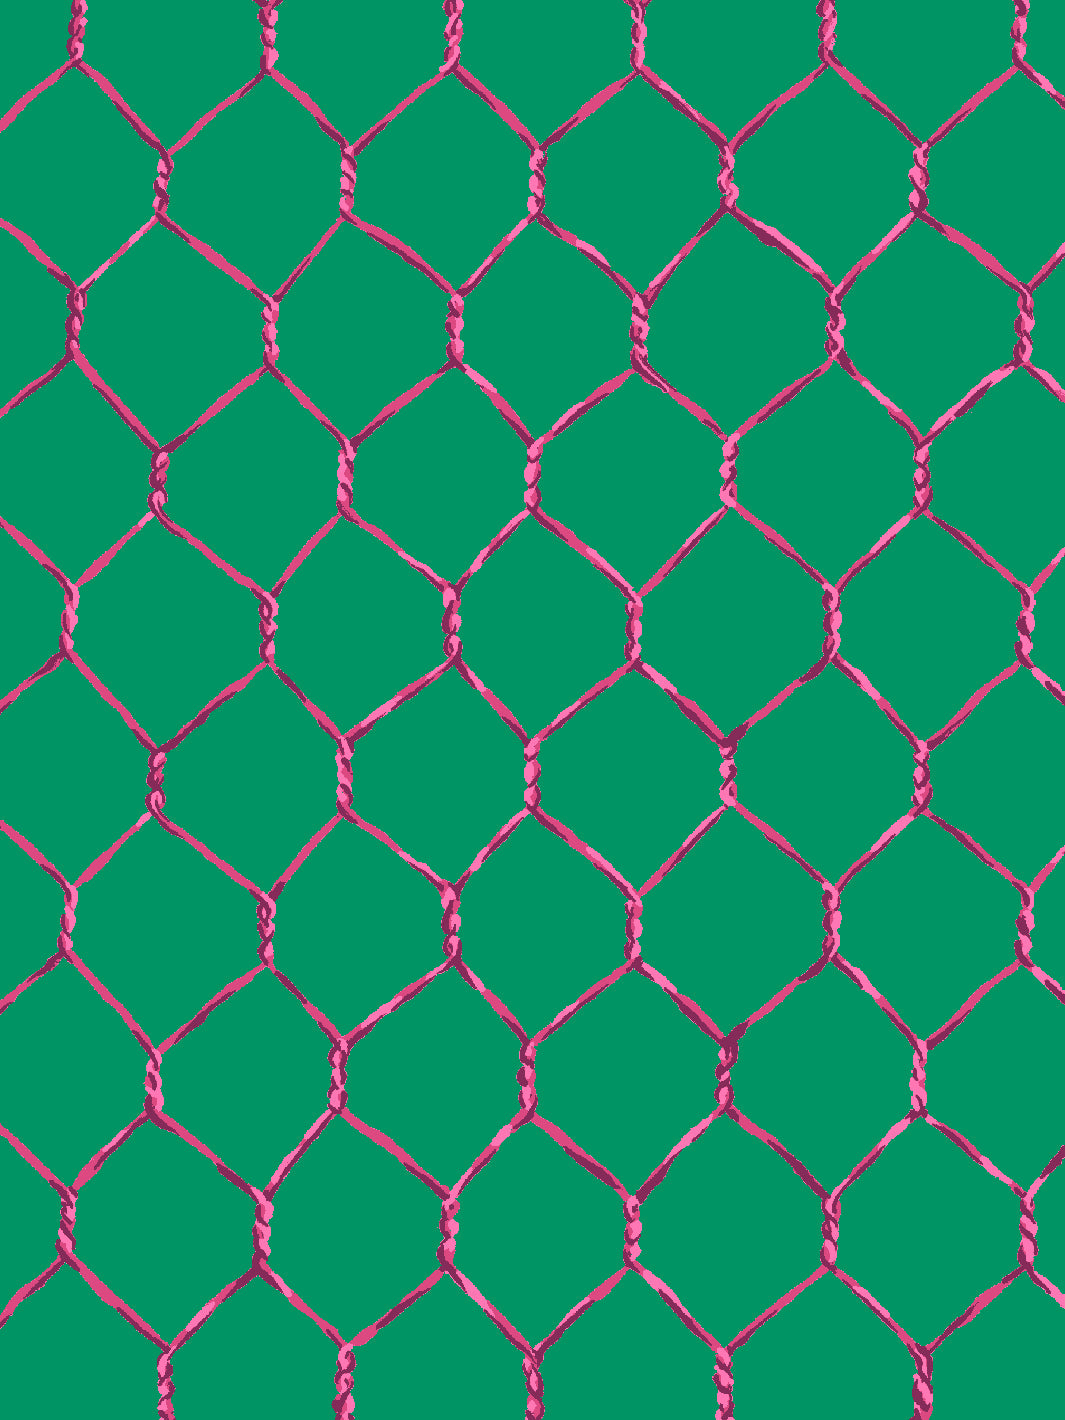 'Evelyn's Chicken Wire' Wallpaper by Sarah Jessica Parker - Raspberry on Emerald